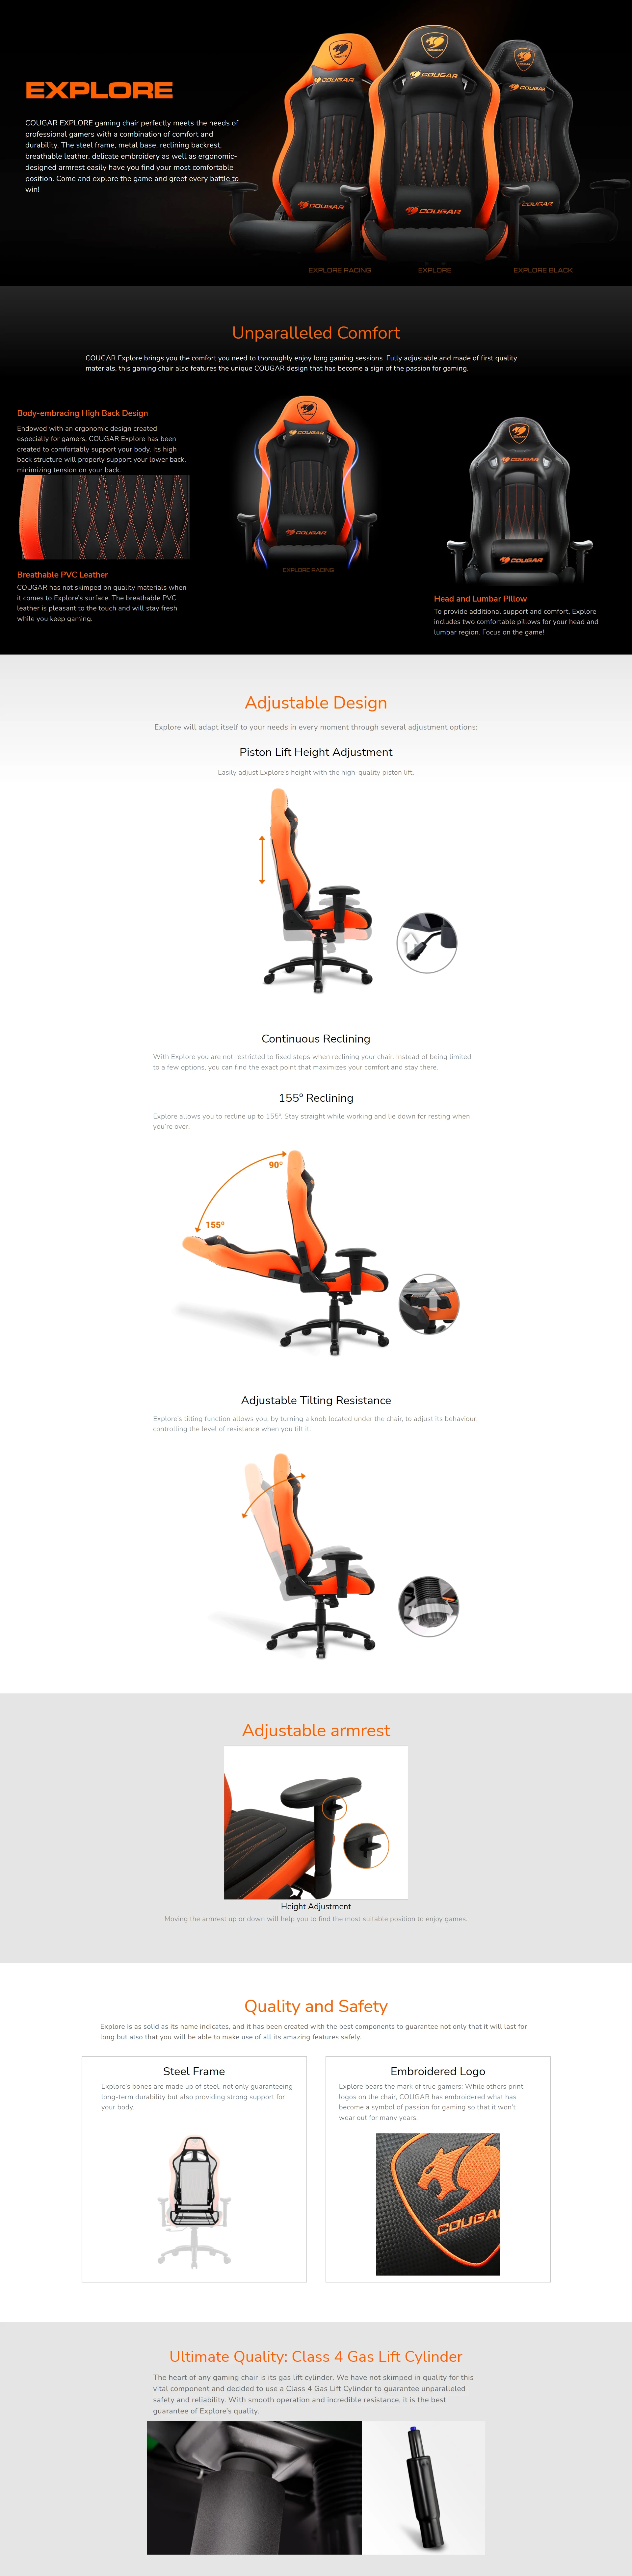 Overview - Cougar - Explore Gaming Chair